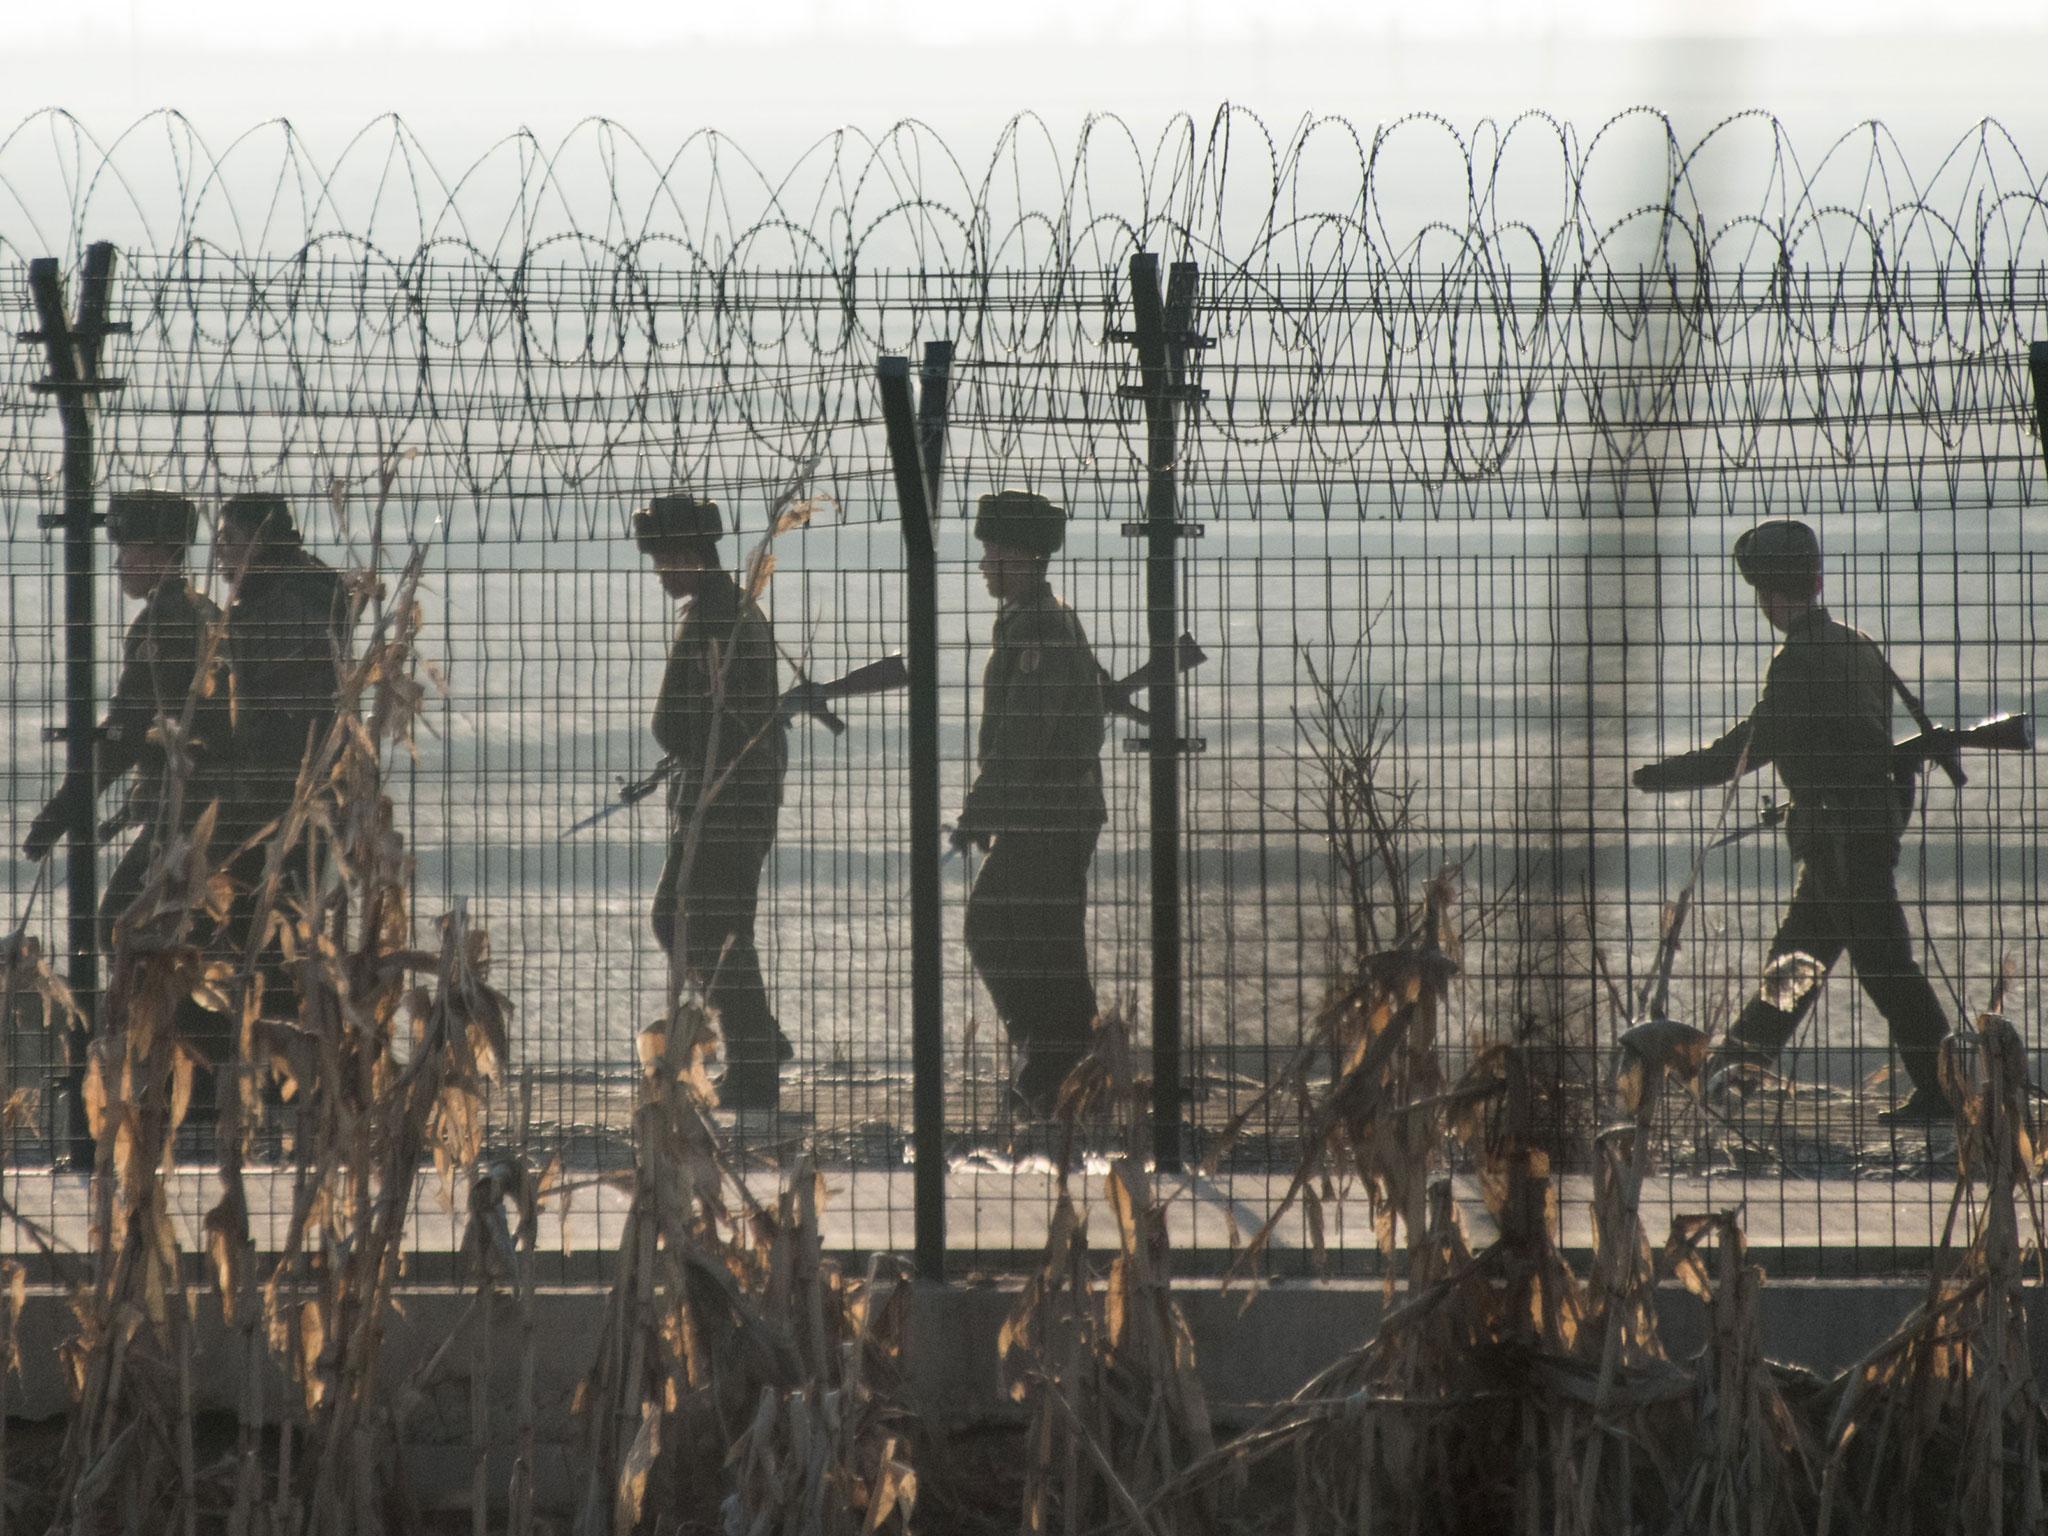 North Korean soldiers patrol next to the border fence near the town of Sinuiju across from the Chinese border town of Dandong on February 10, 2016